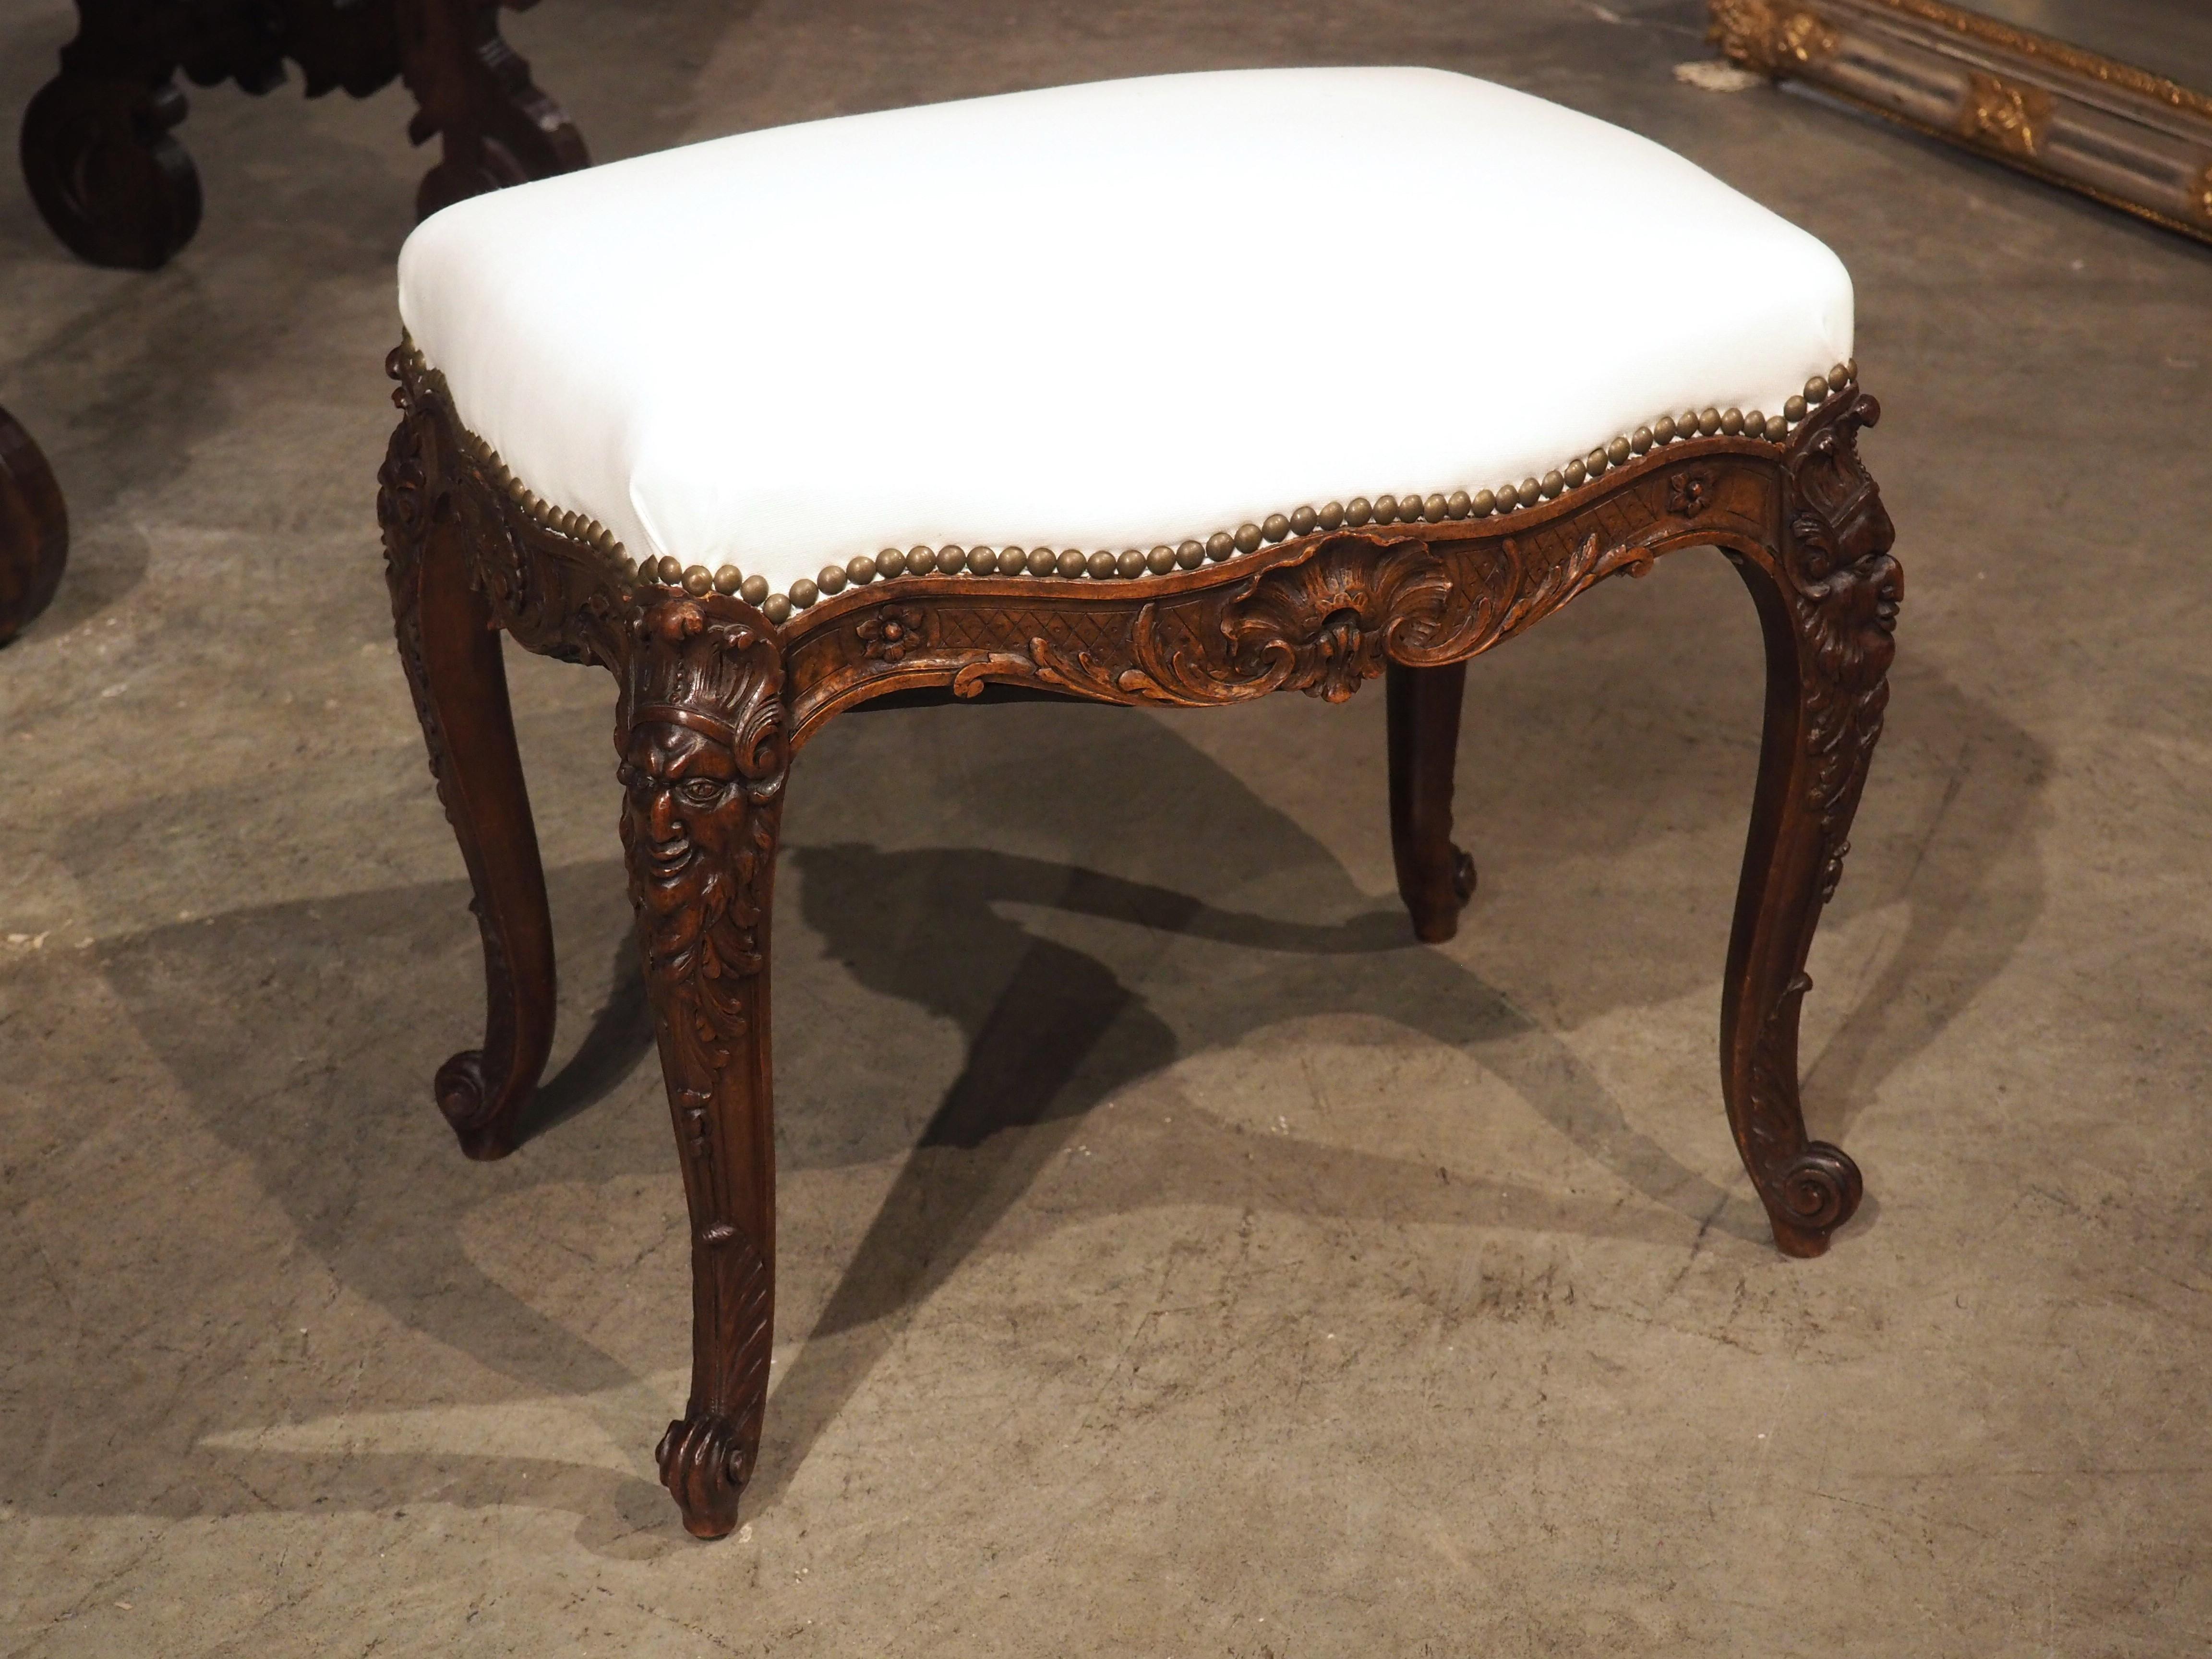 Meticulously hand-carved from rich walnut wood in France during the 1800s, this Regence-style tabouret exudes elegance. Recently upholstered in a crisp, cotton fabric, the juxtaposition of the true white against the dark brown wood patina creates a